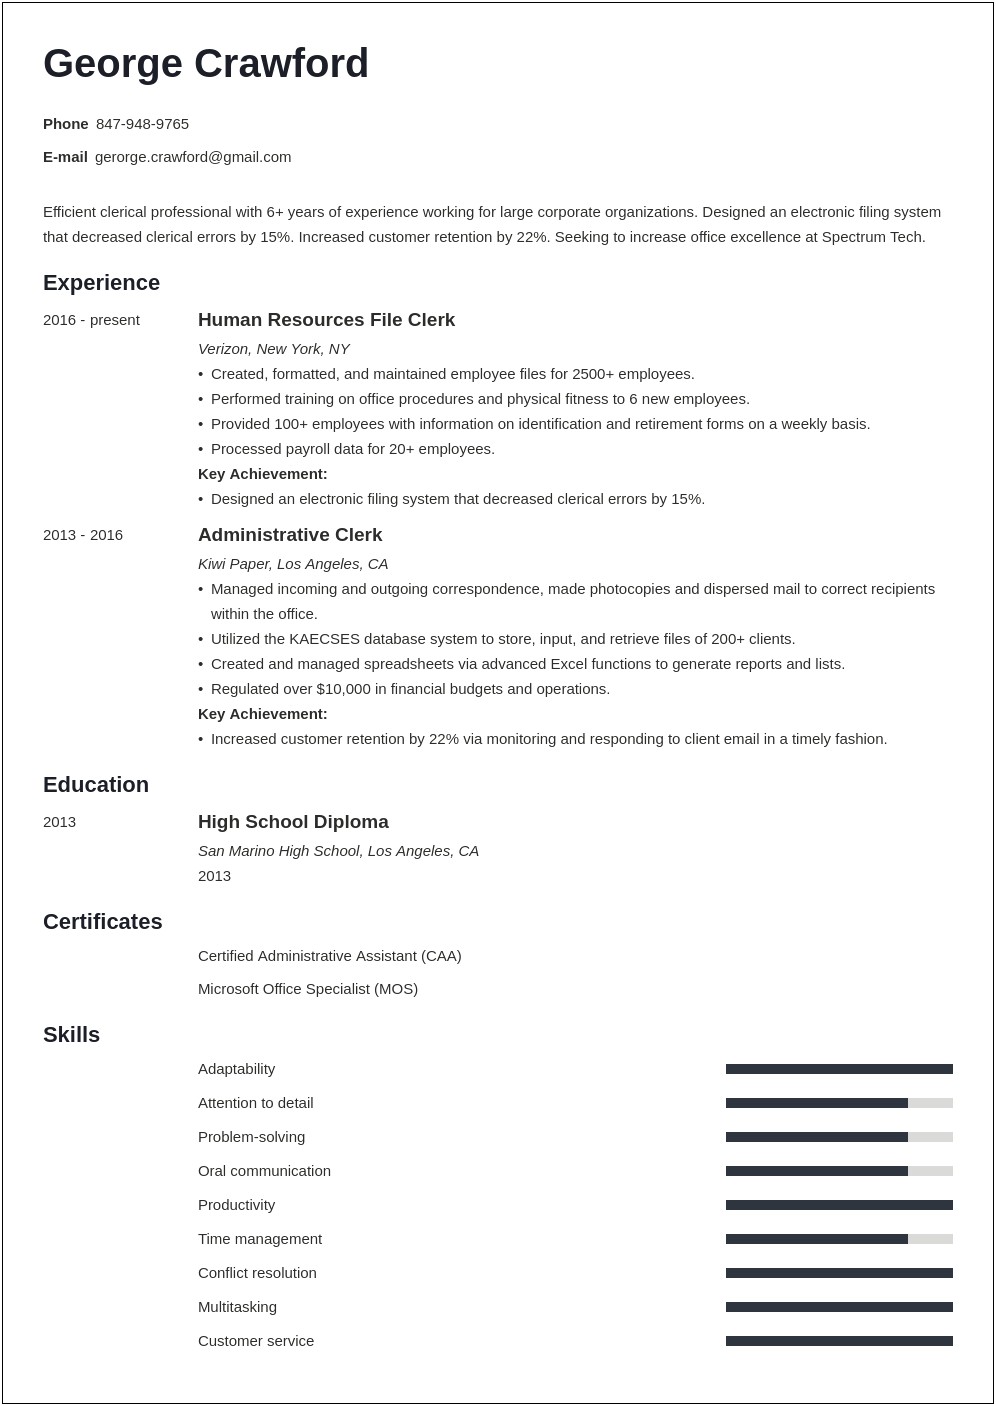 Resume Objective Sample For Clerical